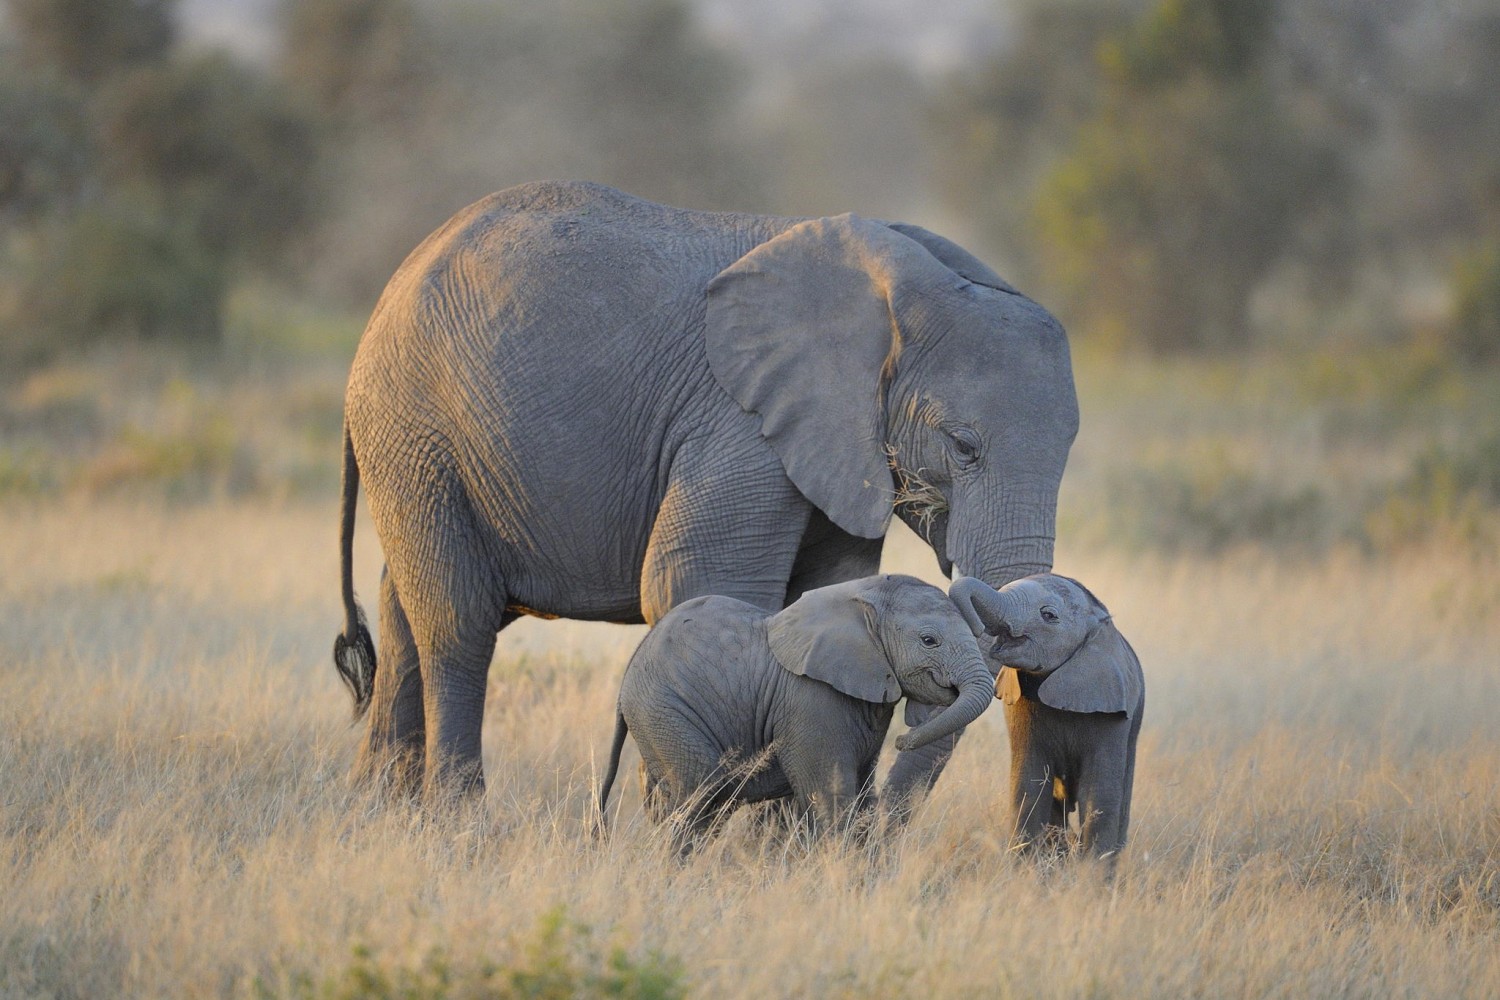 30+ Cute & Funny Baby Elephant Images That Will Brighten Up Your Day